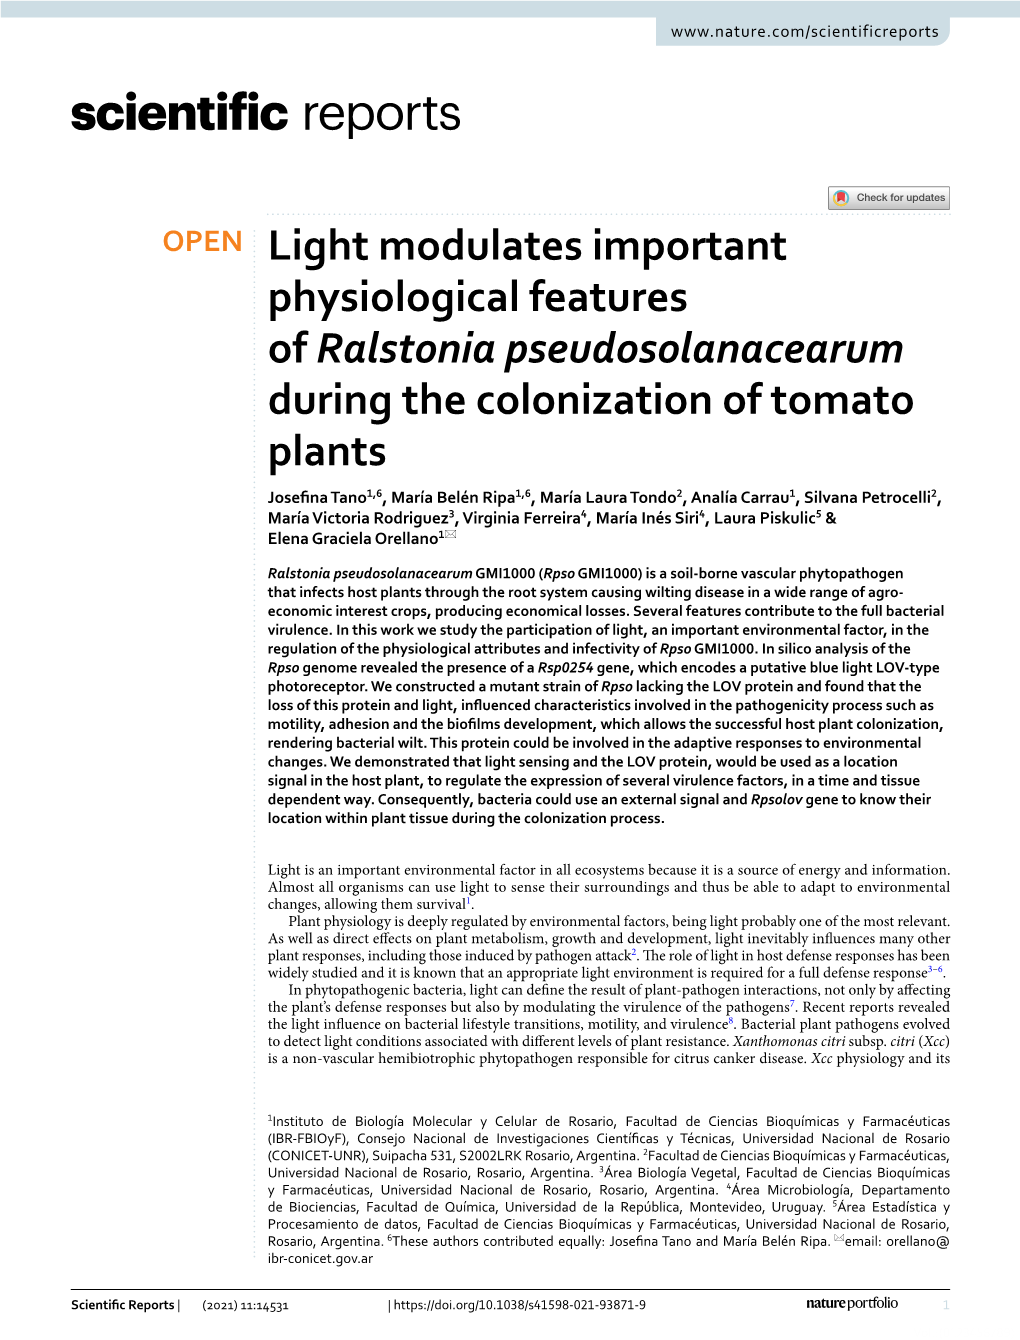 Light Modulates Important Physiological Features of Ralstonia